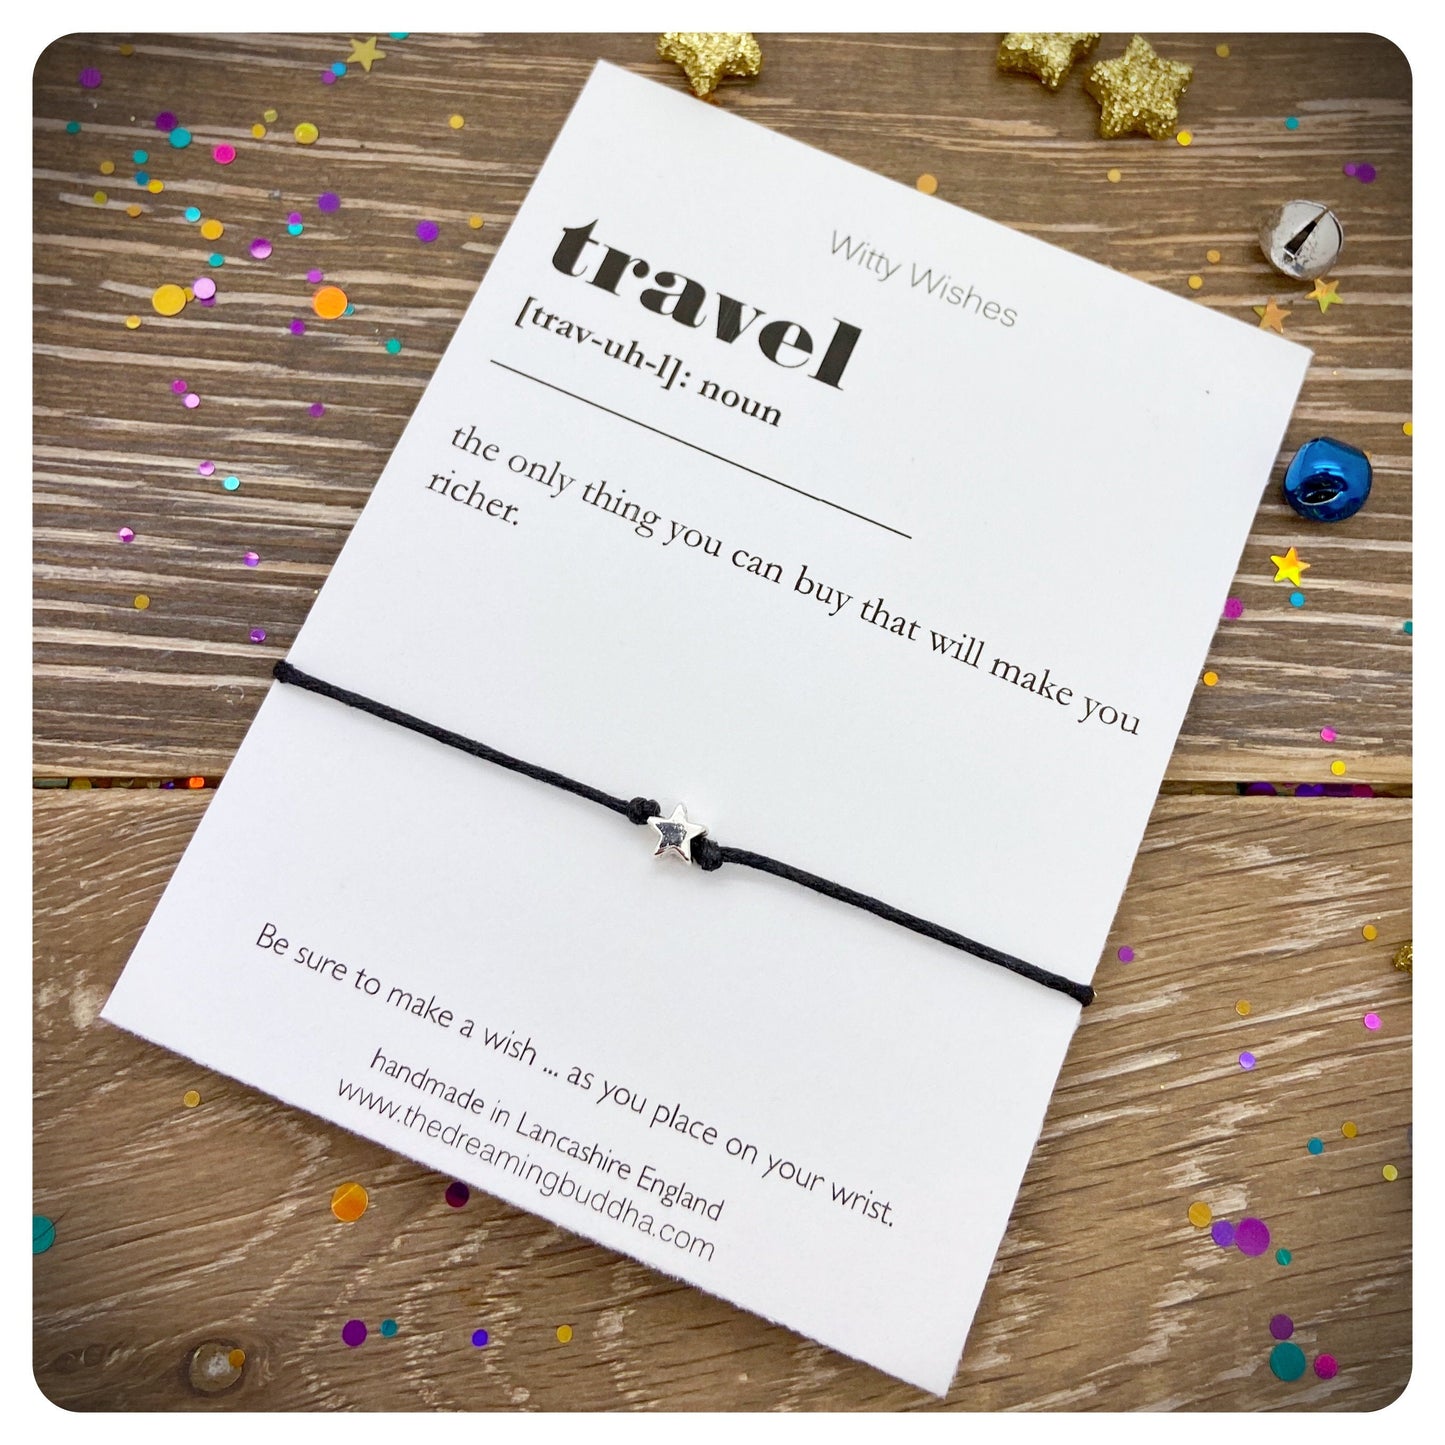 Travel Dictionary Definition Wish Bracelet, Travelling Gift, Travel Jewellery, Travel Friendship Gift